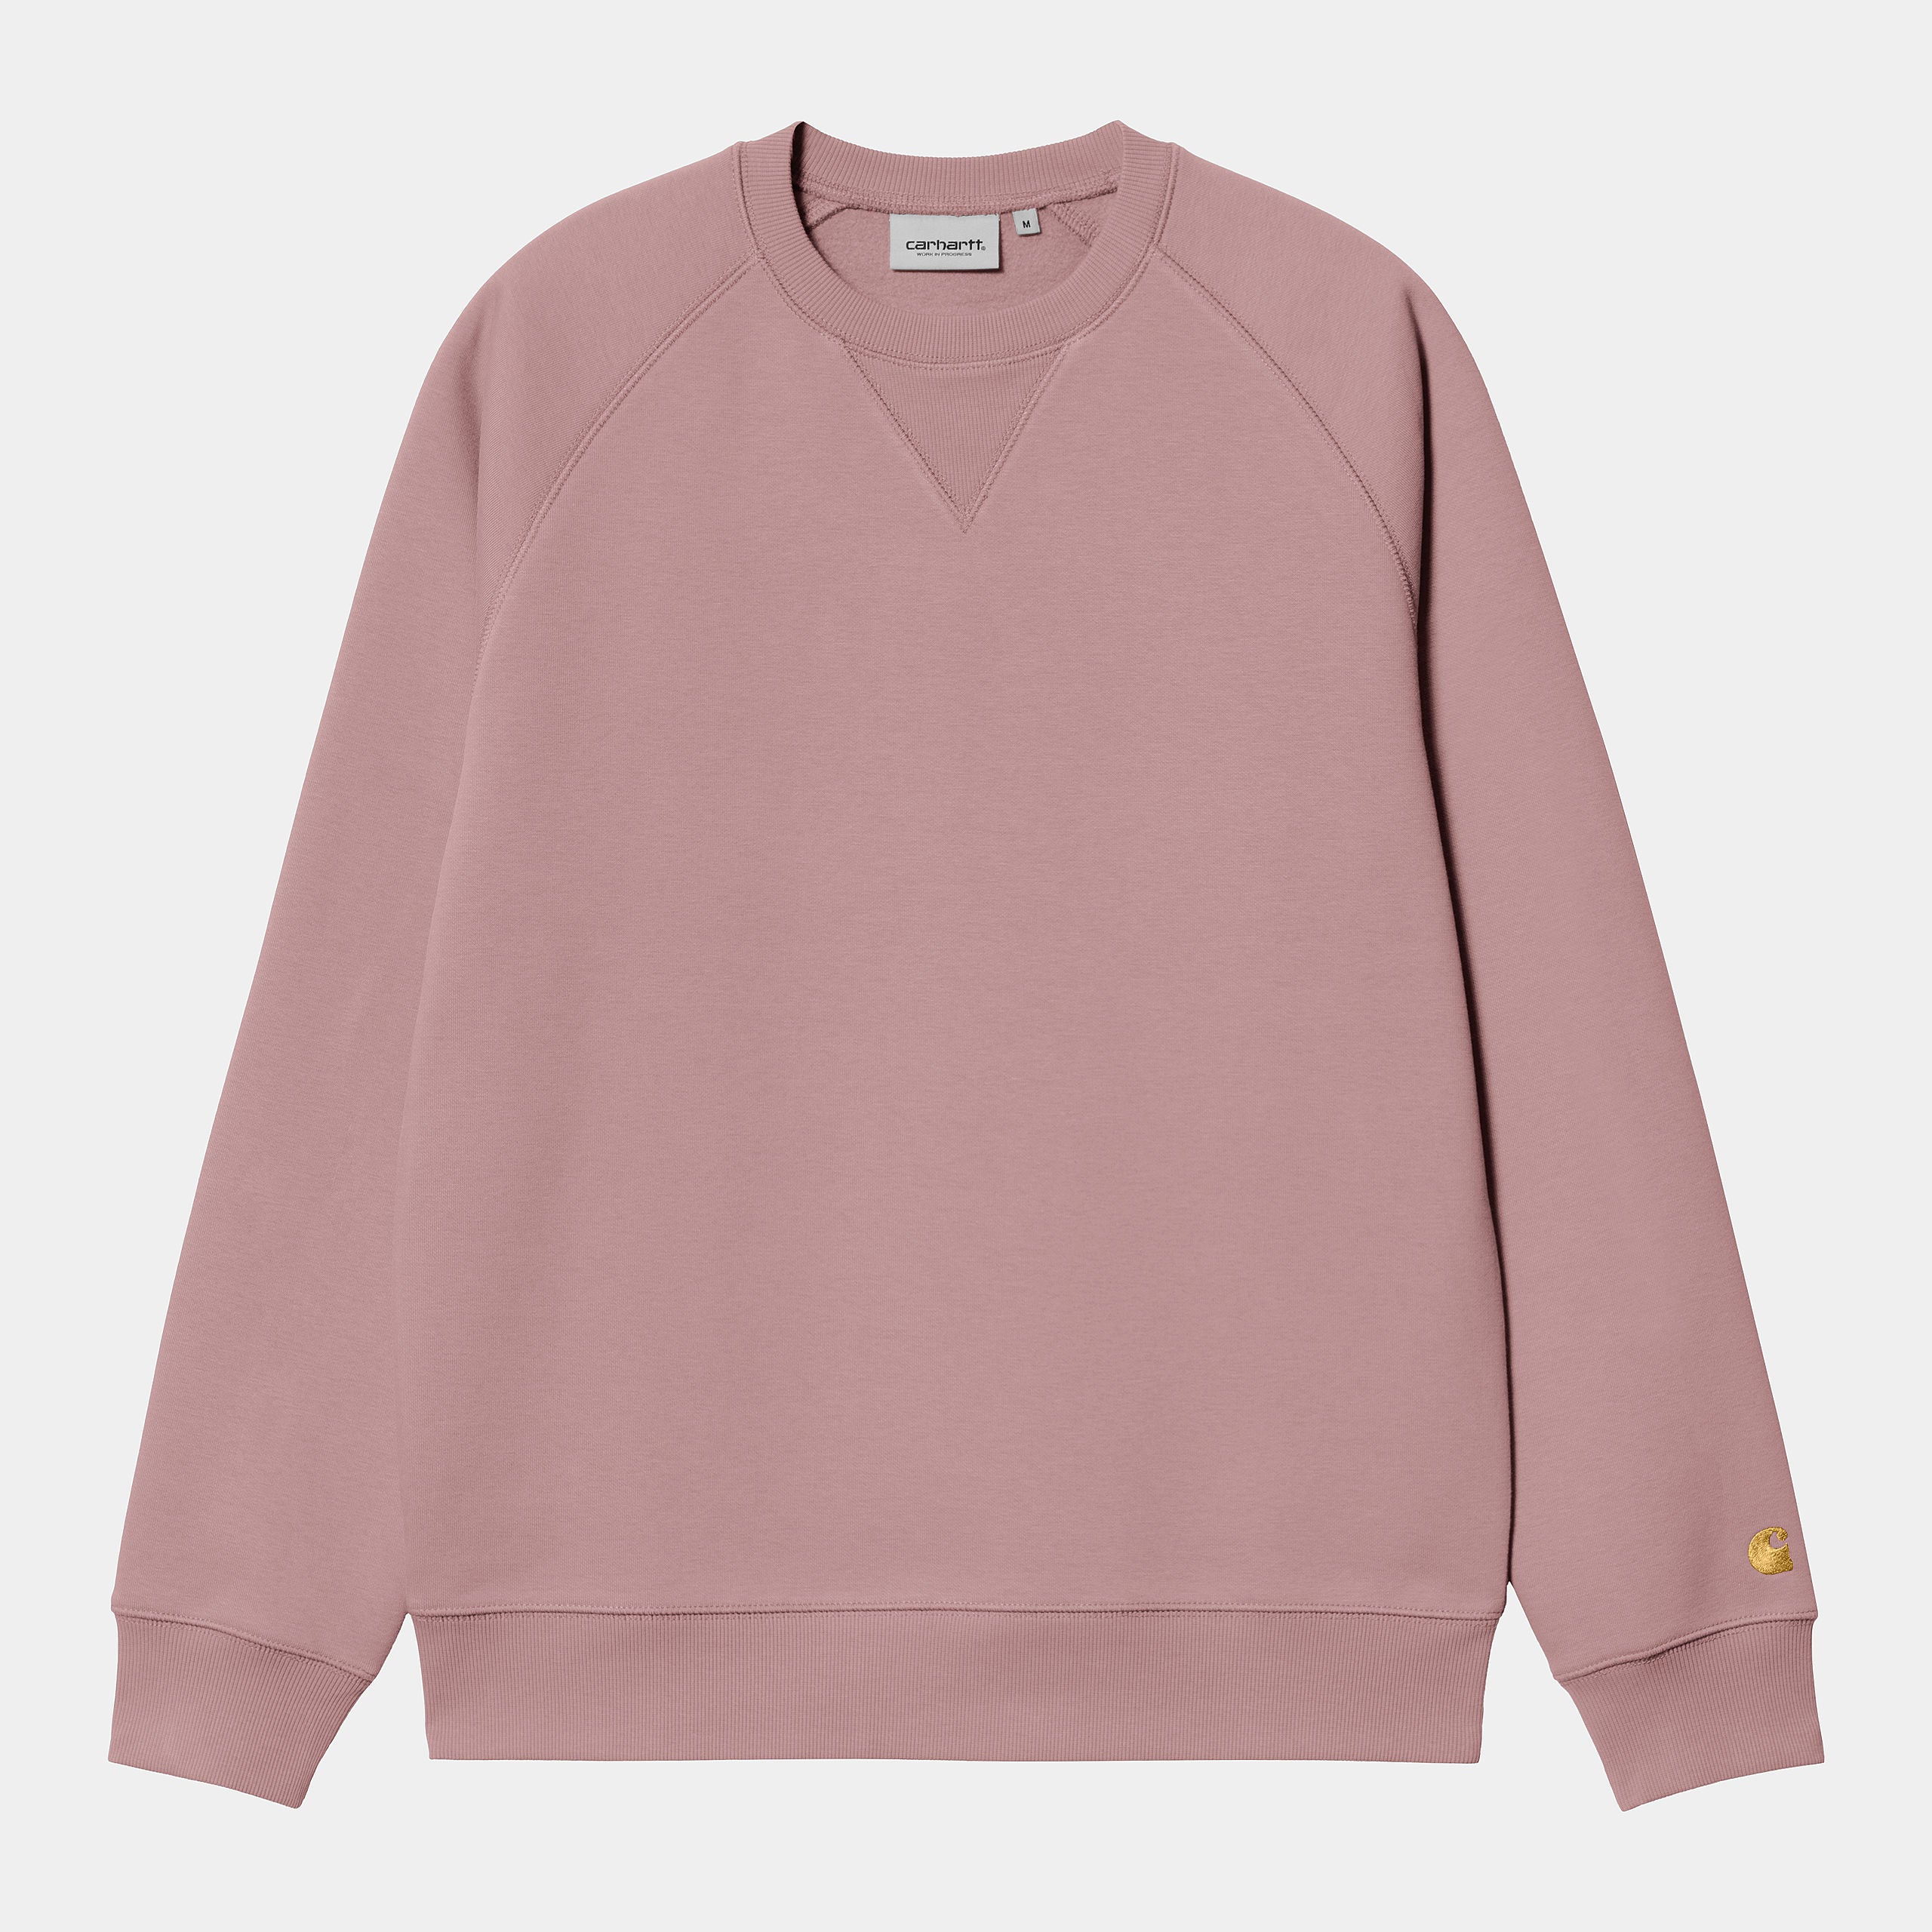 CARHARTT WIP CHASE SWEAT GLASSY PINK/GOLD